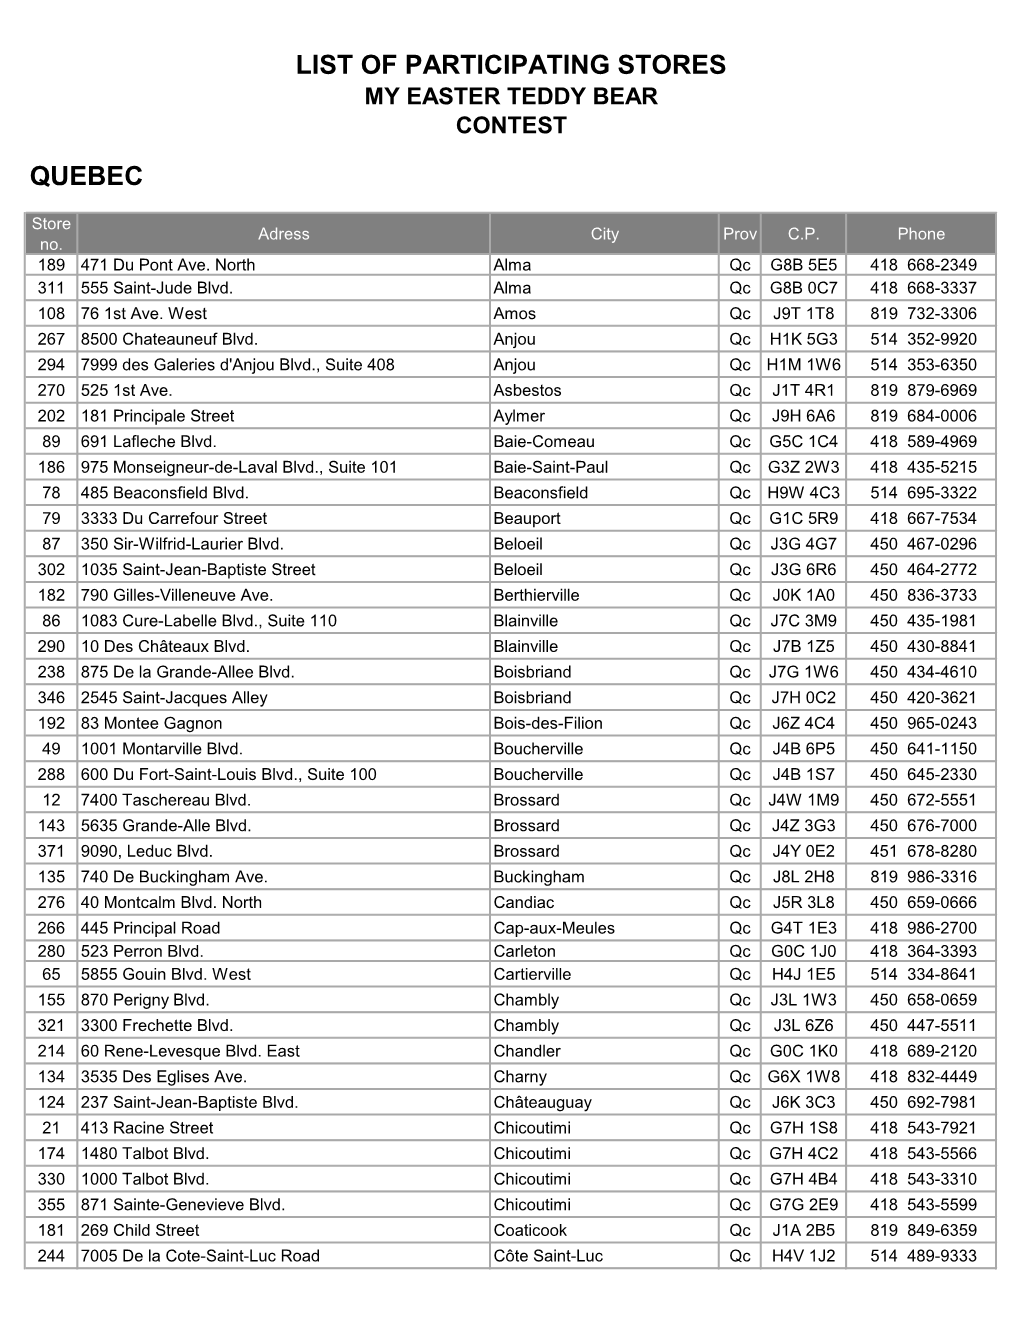 Quebec List of Participating Stores